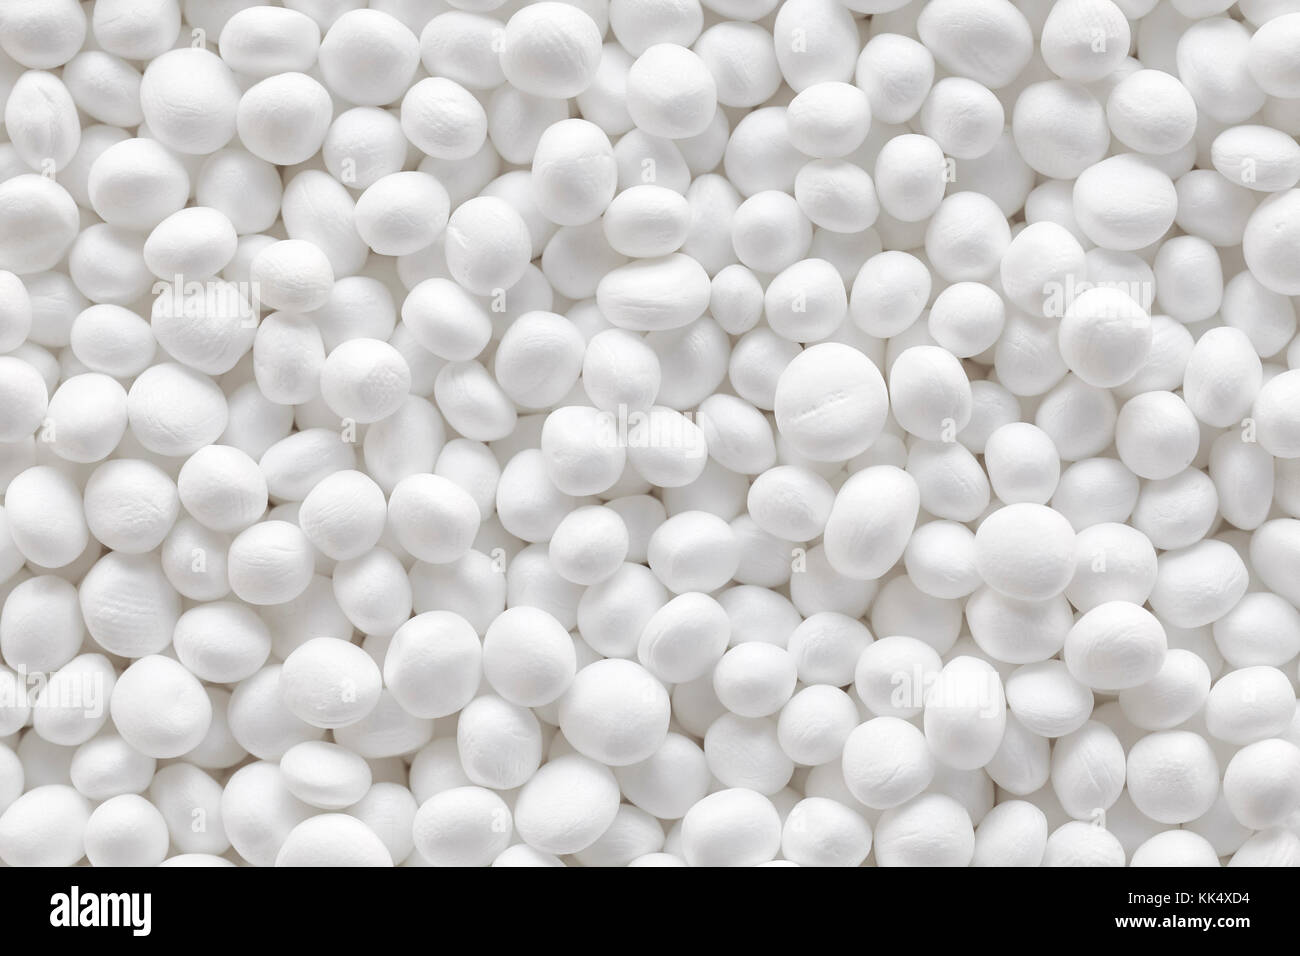 Close up picture of styrofoam balls, abstract texture or background. Stock Photo